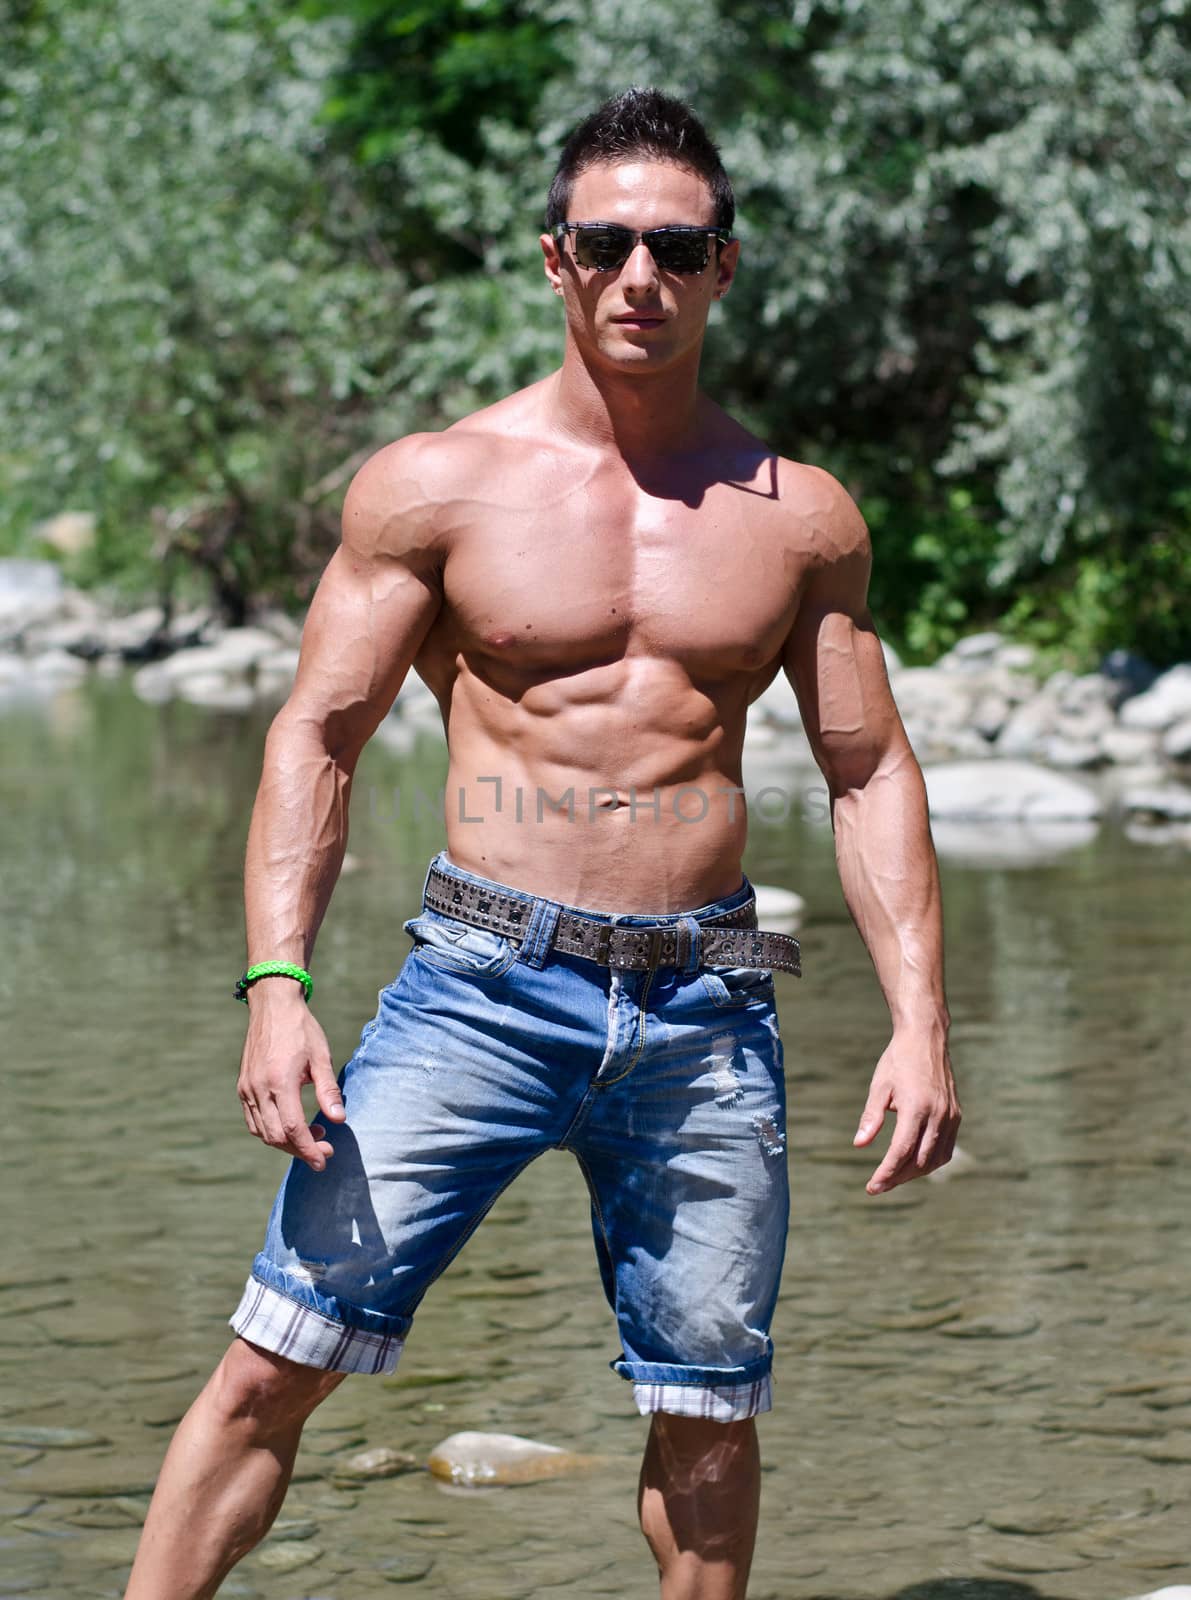 Handsome young muscle man standing in water pond, naked wearing only jeans